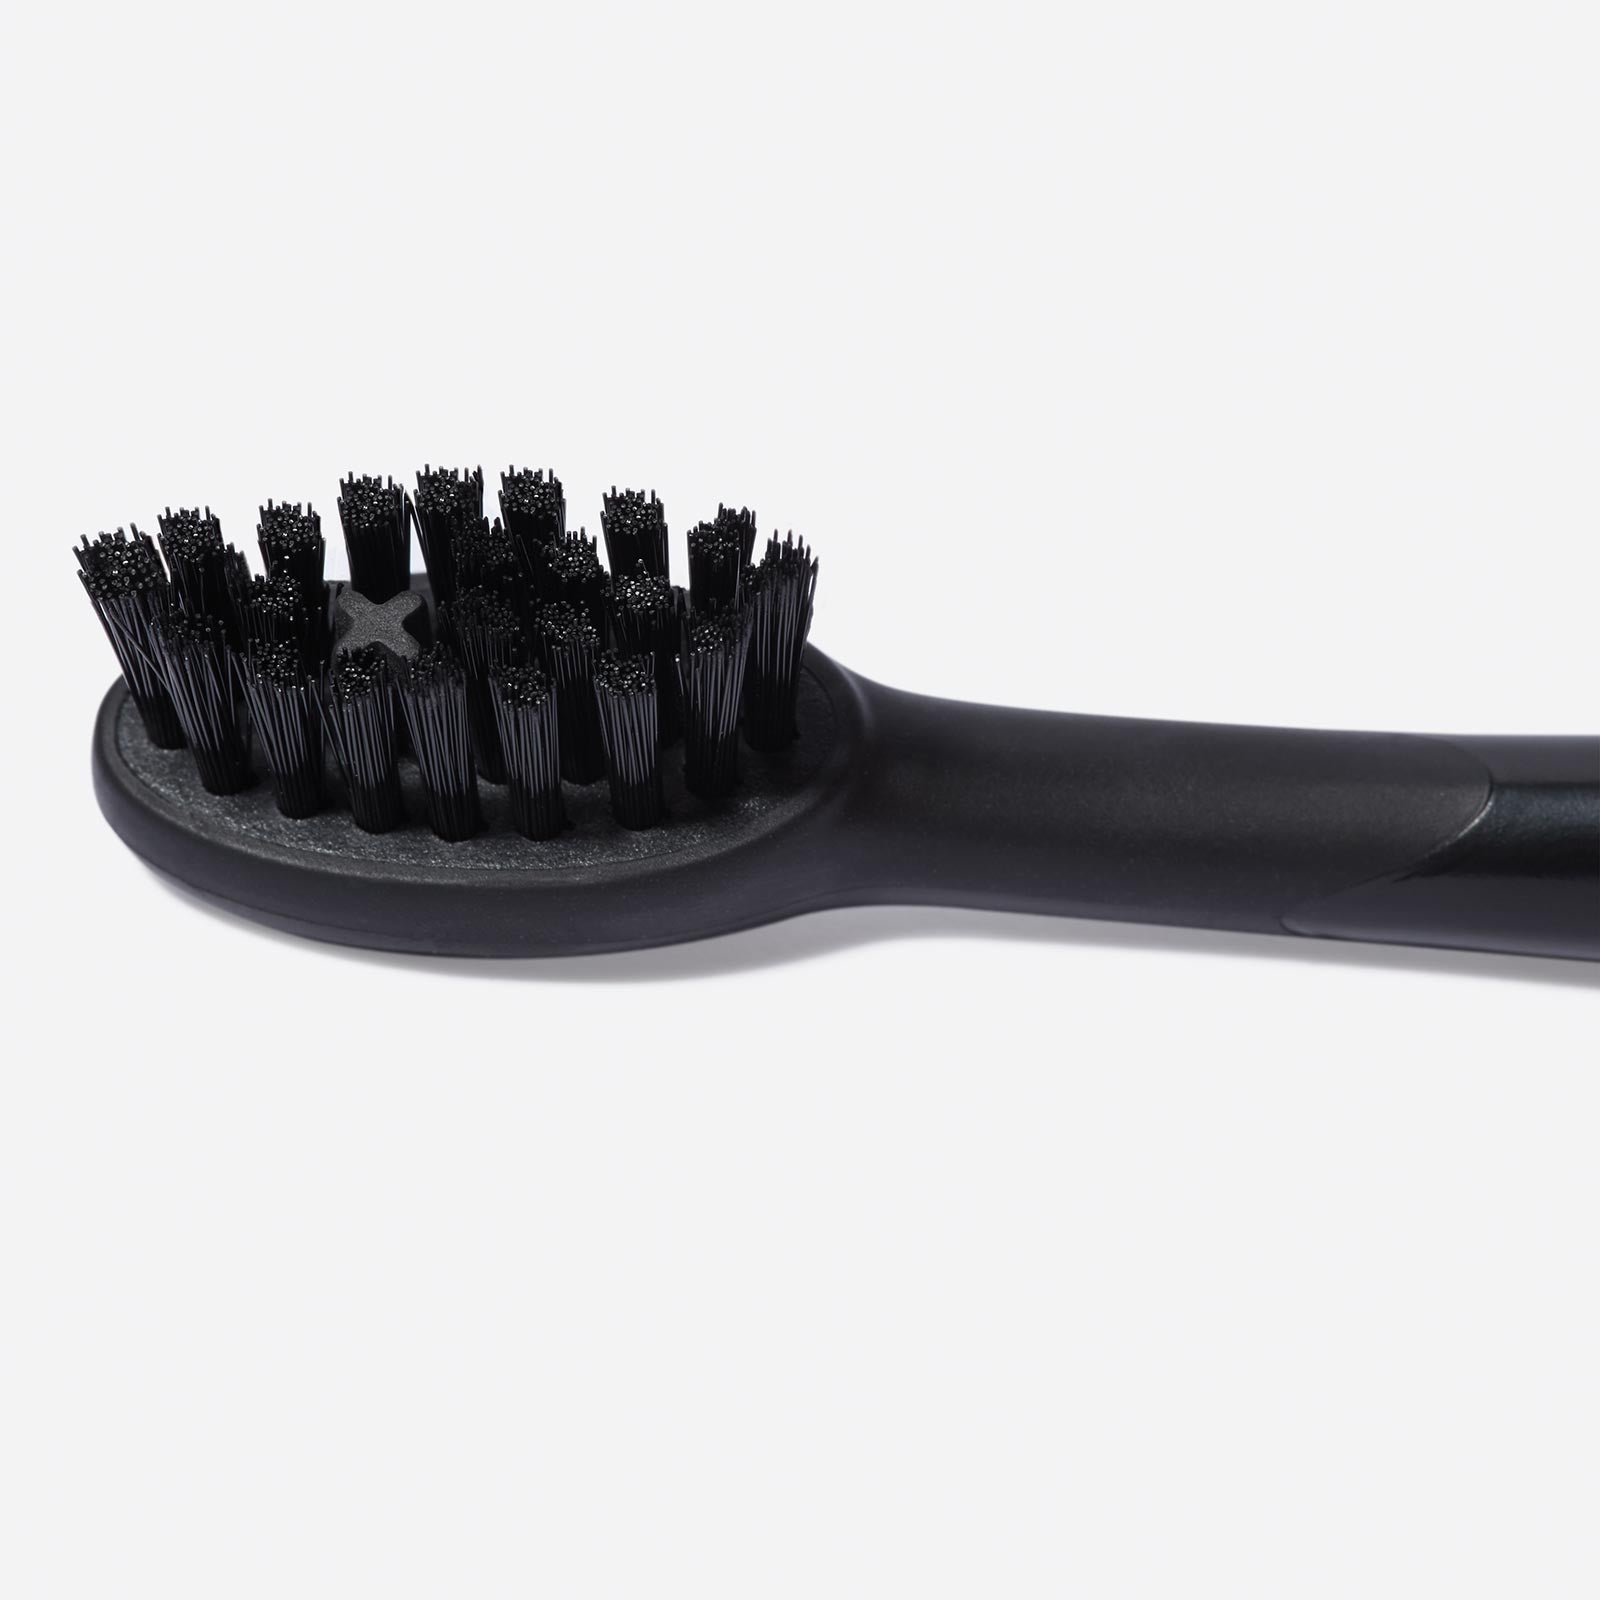 Close-up of a black brush head for the Sonic Toothbrush